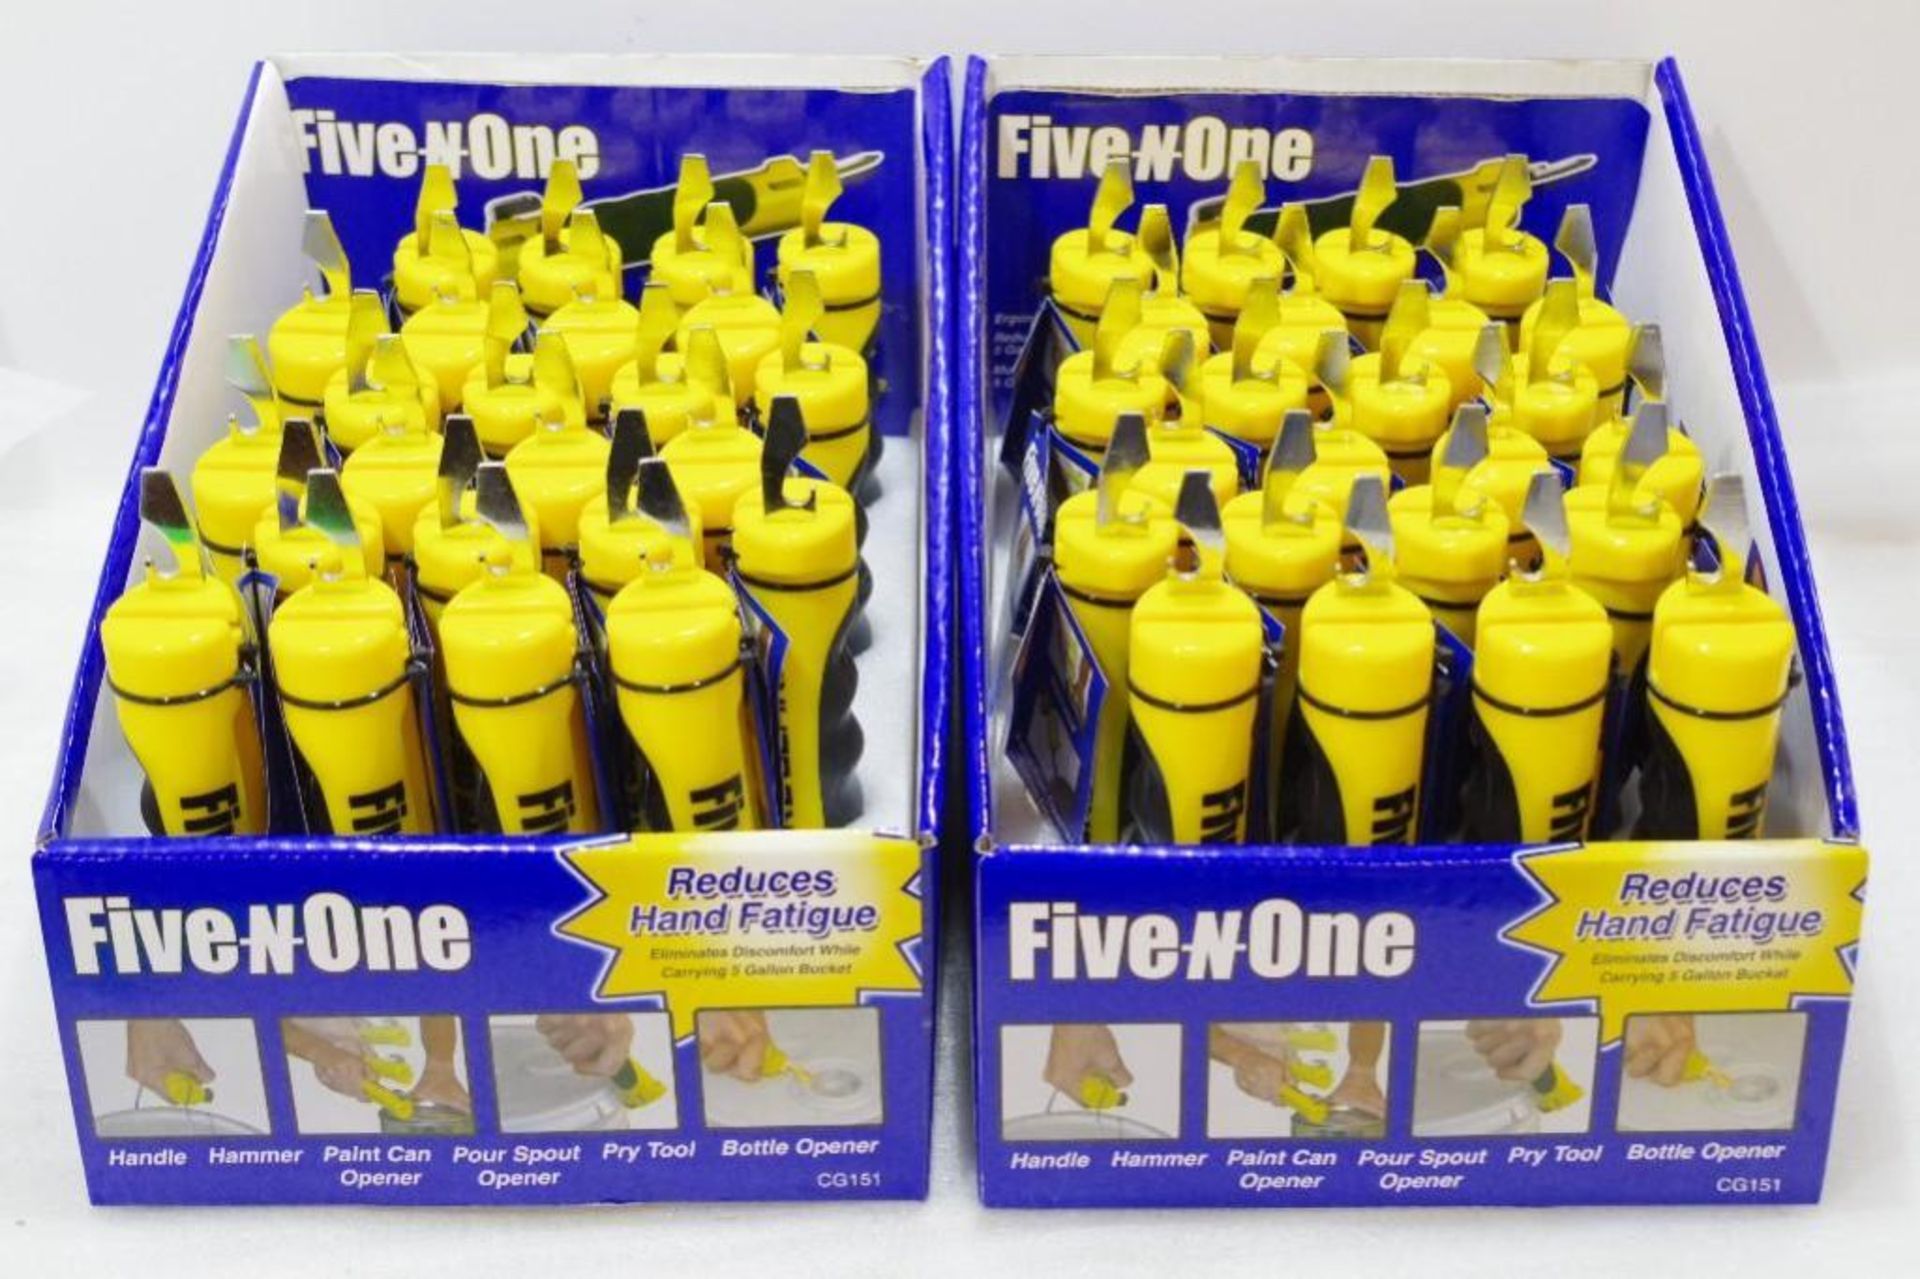 (48) NEW CORE GEAR FIVE-N-ONE Screw Driver / Painting Tools (2 Boxes of 24 Each)